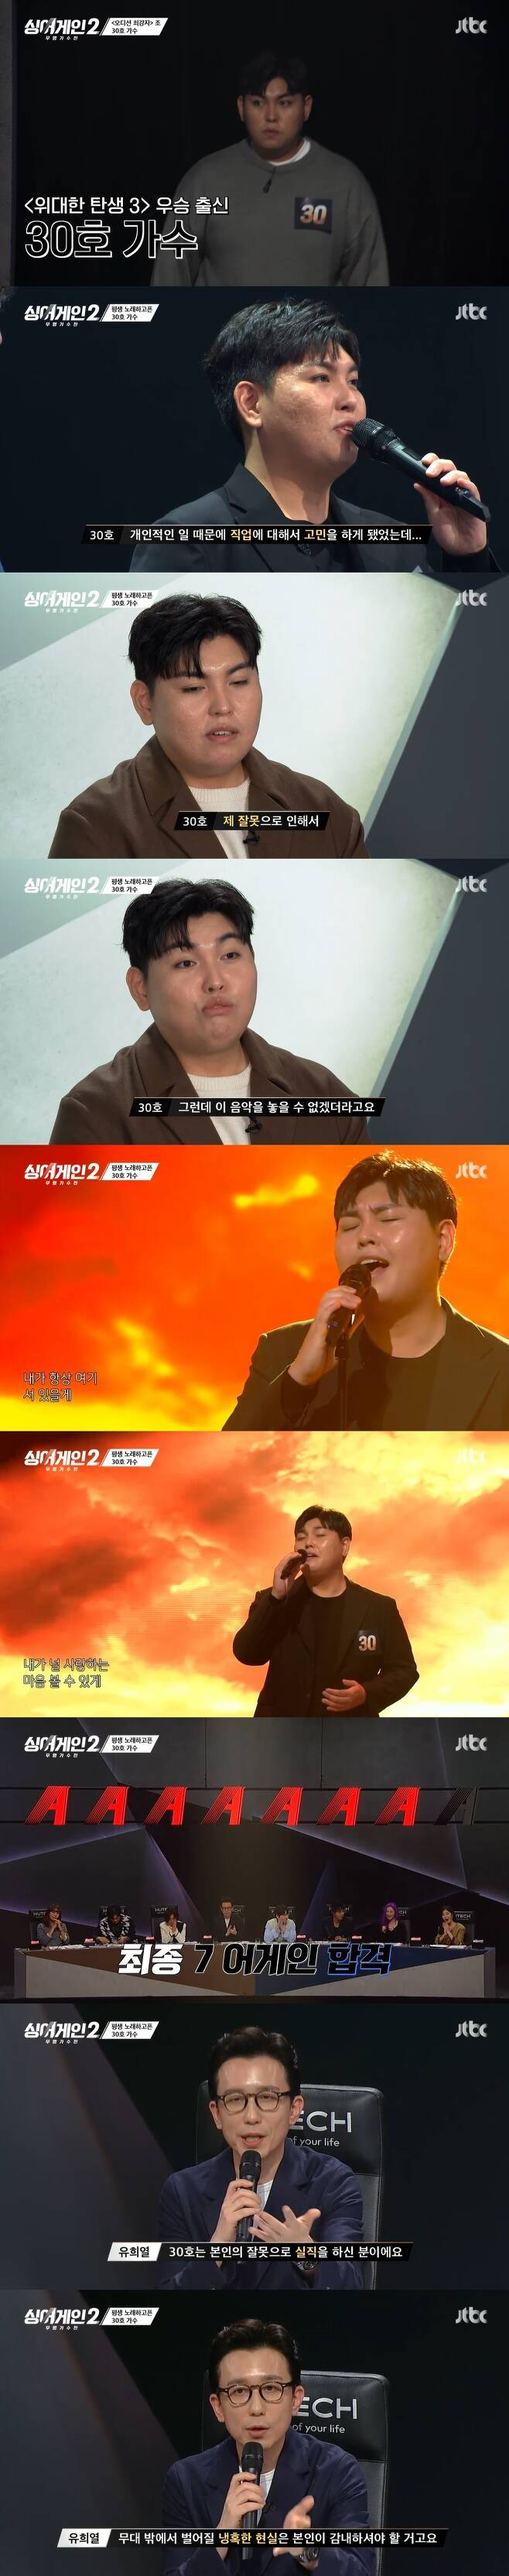 Seoul = = Han Dong Geun appeared in Sing Again 2.In the JTBC entertainment program Sing Again 2 broadcasted on the 20th, MBC Great Birth 3 winner Han Dong Geun was on the 30th Singer and gathered attention.Han Dong Geun raised his curiosity with his introduction that I am a singer.He said in an interview, I was worried about my job again because of my personal work.Han Dong Geun had been self-reliant in August 2018, when he was questioned for Drunk driving.I was really thinking about stopping my music life because of my fault and really going to quit music or do something else.But I could not put this music, he said. I always dreamed that I loved my best and wanted to live my life with music. Han Dong Geun, who said, Today, after this stage is over, I will not be able to release music for a lifetime no matter what the result is.The introduction was a calm start, Han Dong Geun showed off his singing skills.It was a perfect stage for delicate emotional expression, explosive voice, power to immerse in an instant, and extraordinary space.Except for the judges Lee Hae-ri, Lee Sun-hee, You Hee-yeol, Yoon Do-hyun, Kyu-hyun, Song Min-ho, Kim In-na and Sunmi pressed the pass button.Han Dong Geun confirmed his next round as he received the final 7Again.Judge You Hee-yeol gave realistic advice.He pointed out to Han Dong Geun, I am not unemployed because of my own fault, I have applied here to get a job again.But, We will see the stage and evaluate the song. The cold reality outside the stage should be endured by you. It is up to you to reverse it and drag it forward.I was good at the stage today. 